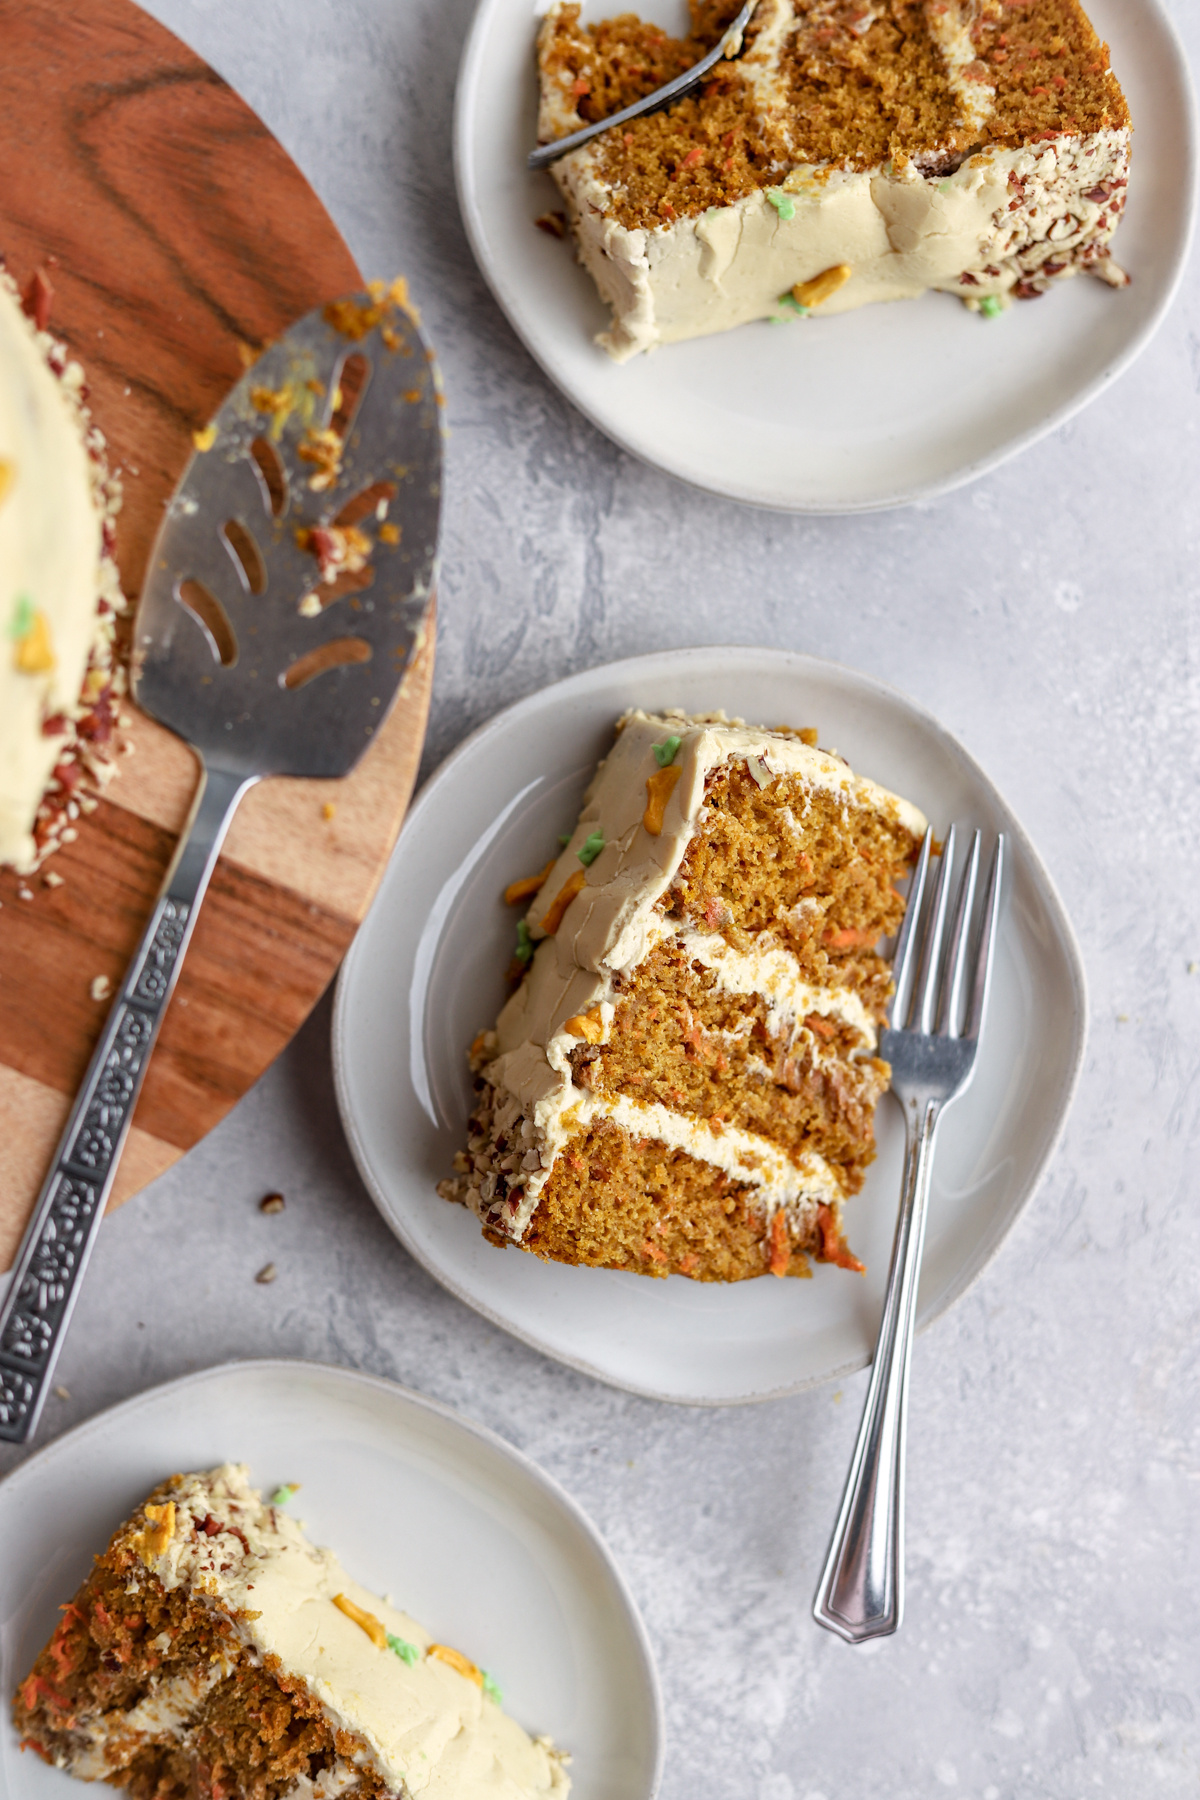 Pumpkin carrot cake slices on plates and a cake server on a cake stand.